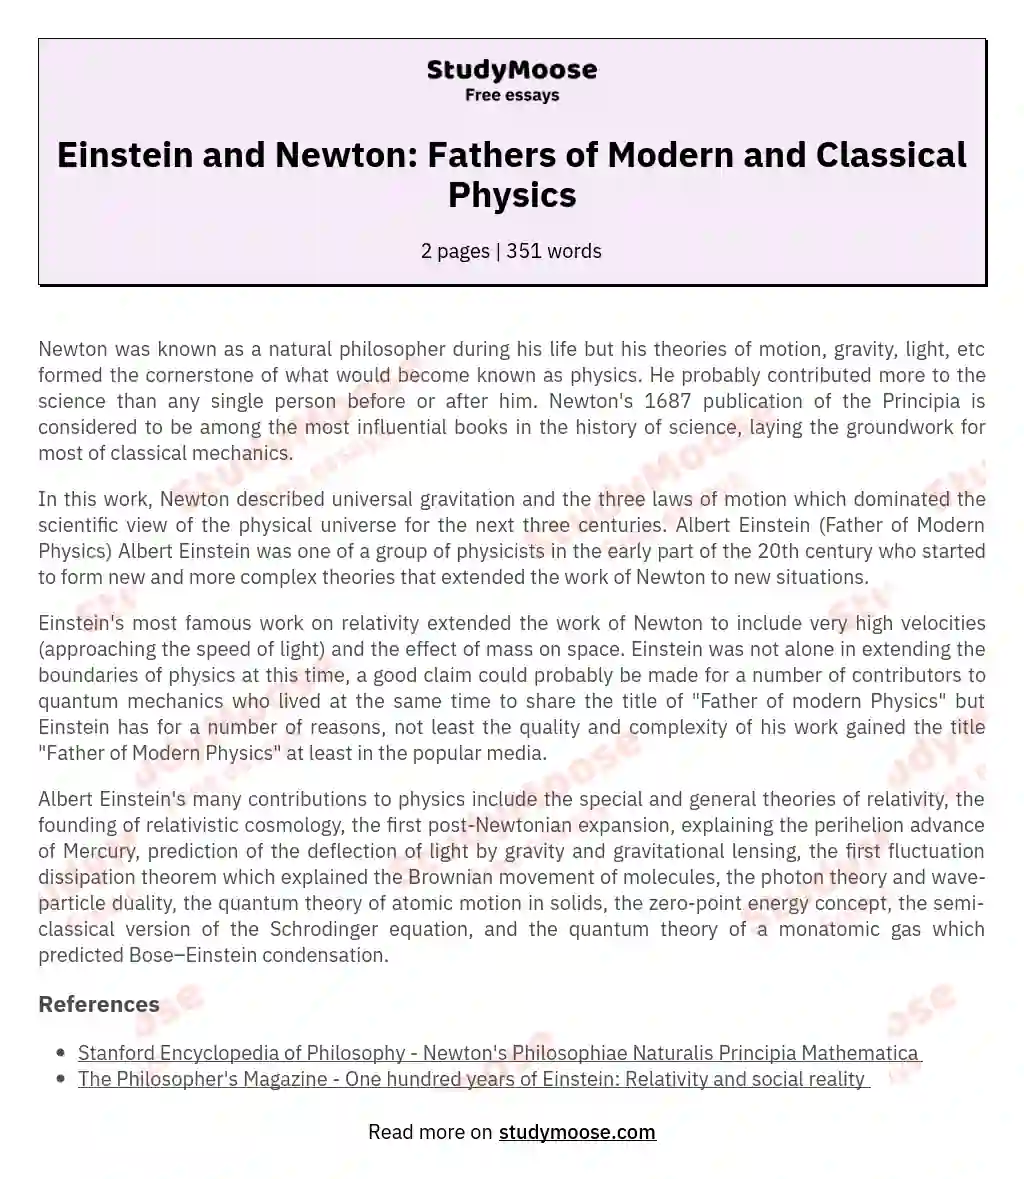 Einstein and Newton: Fathers of Modern and Classical Physics essay